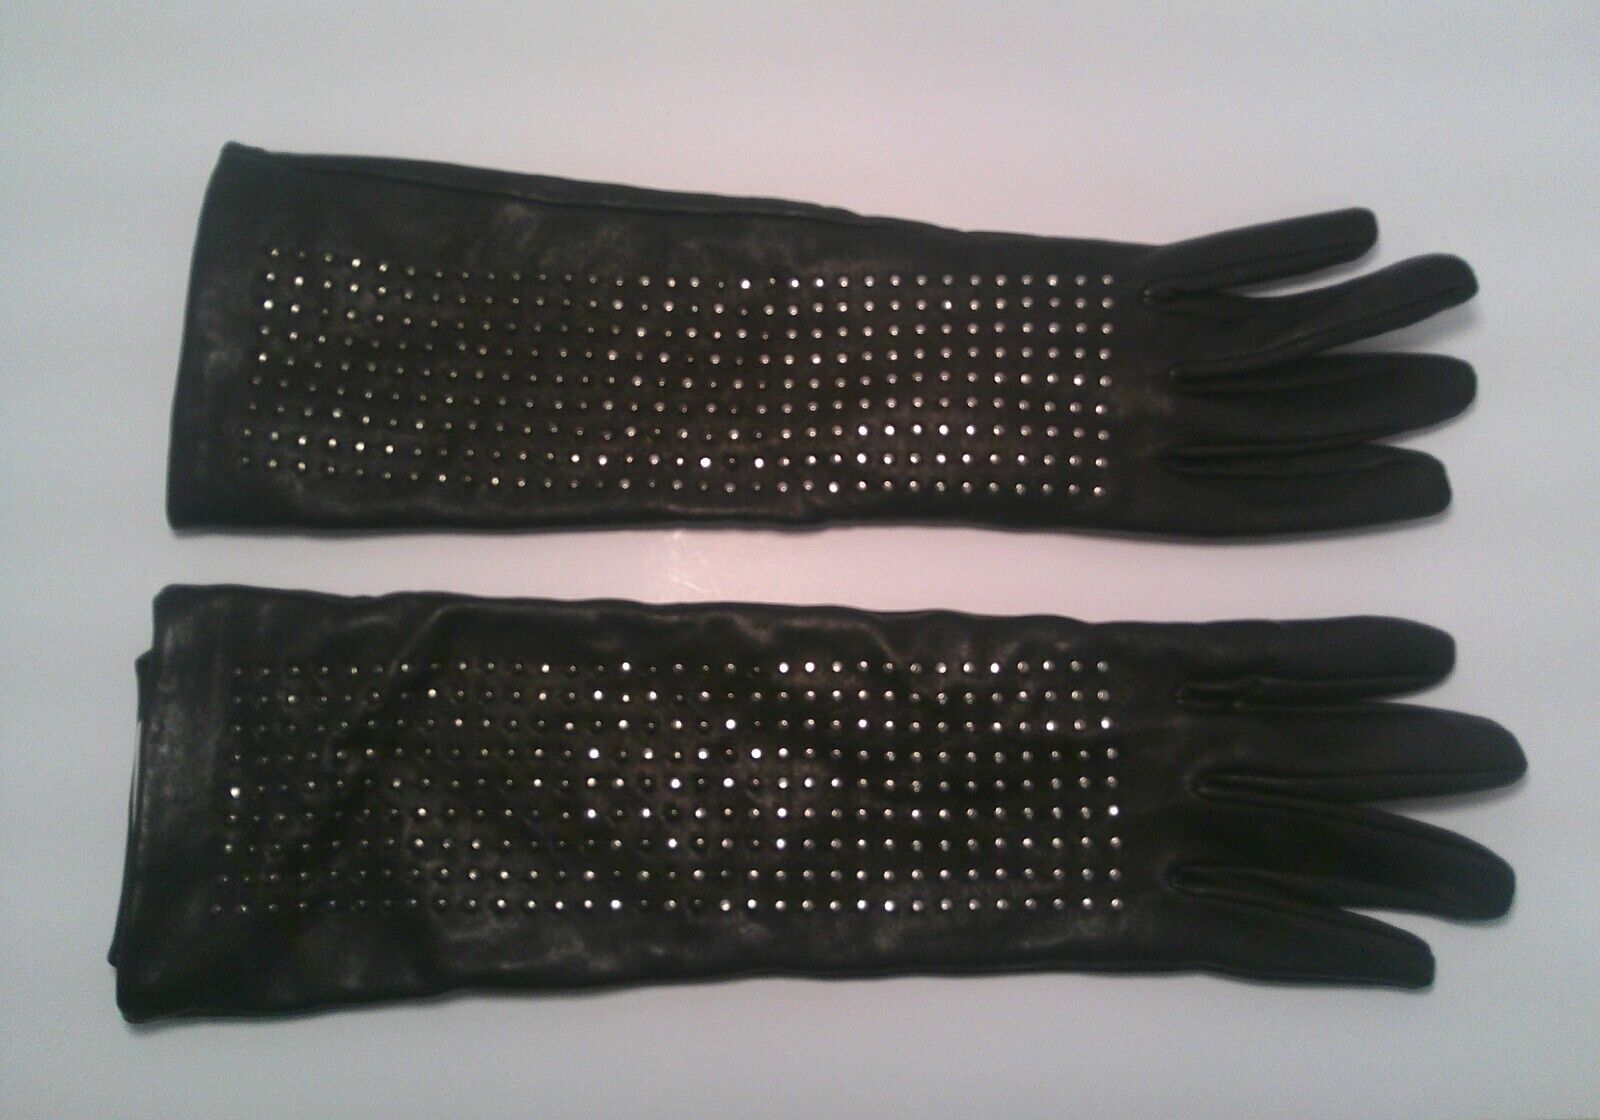 14" Brian Atwood Neiman Marcus  SOFT Black Leather Studded Gloves M